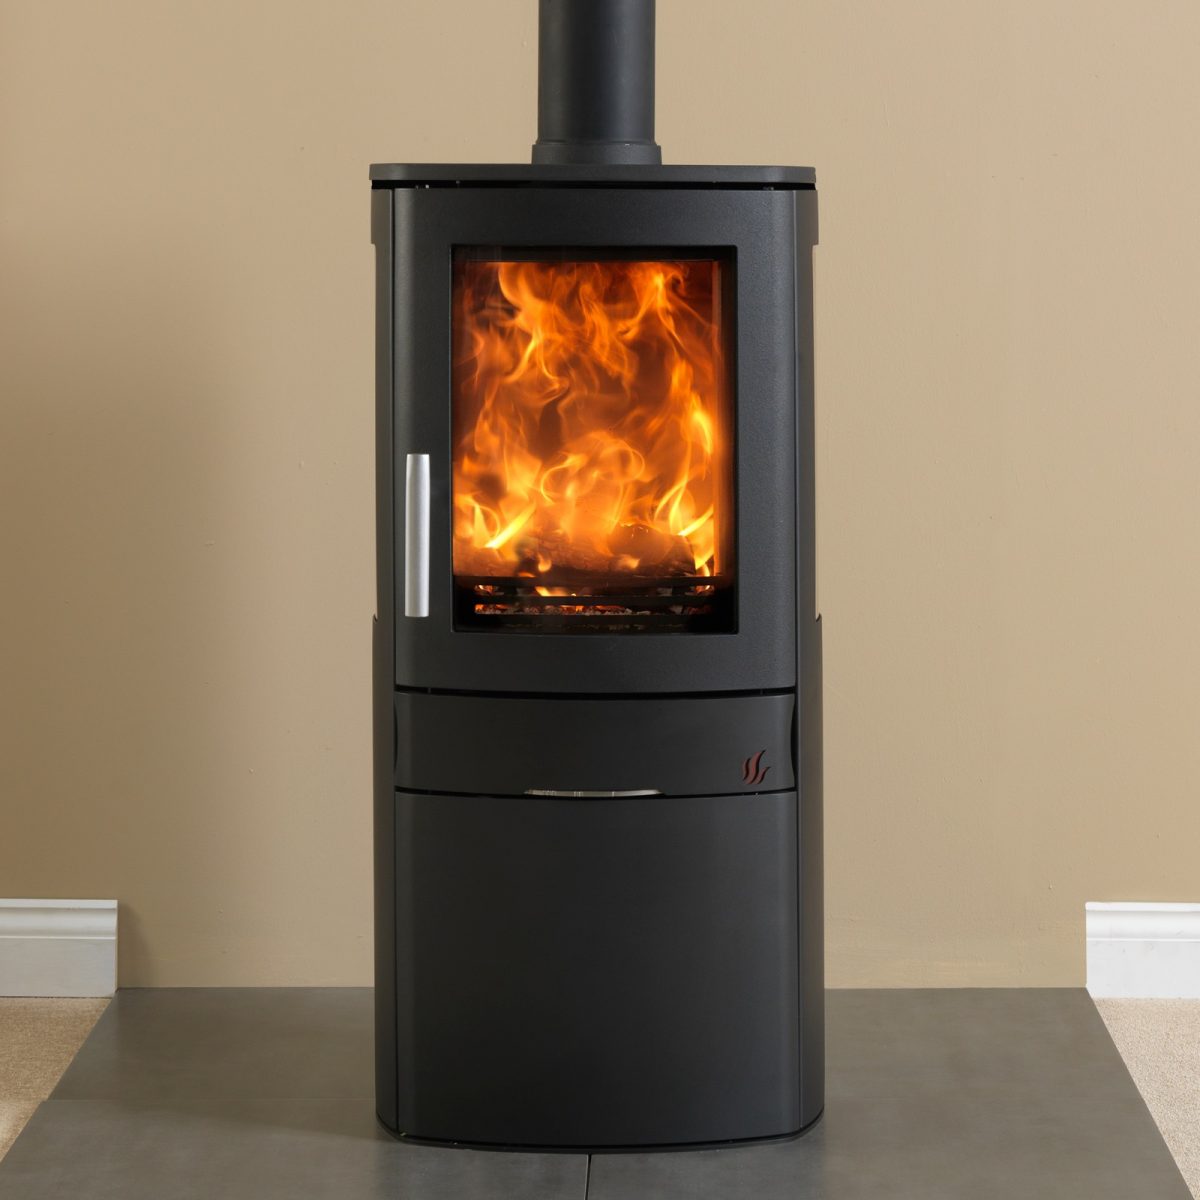 ACR Neo 3C ECO Wood Burning Stove with glass sides and cupboard base